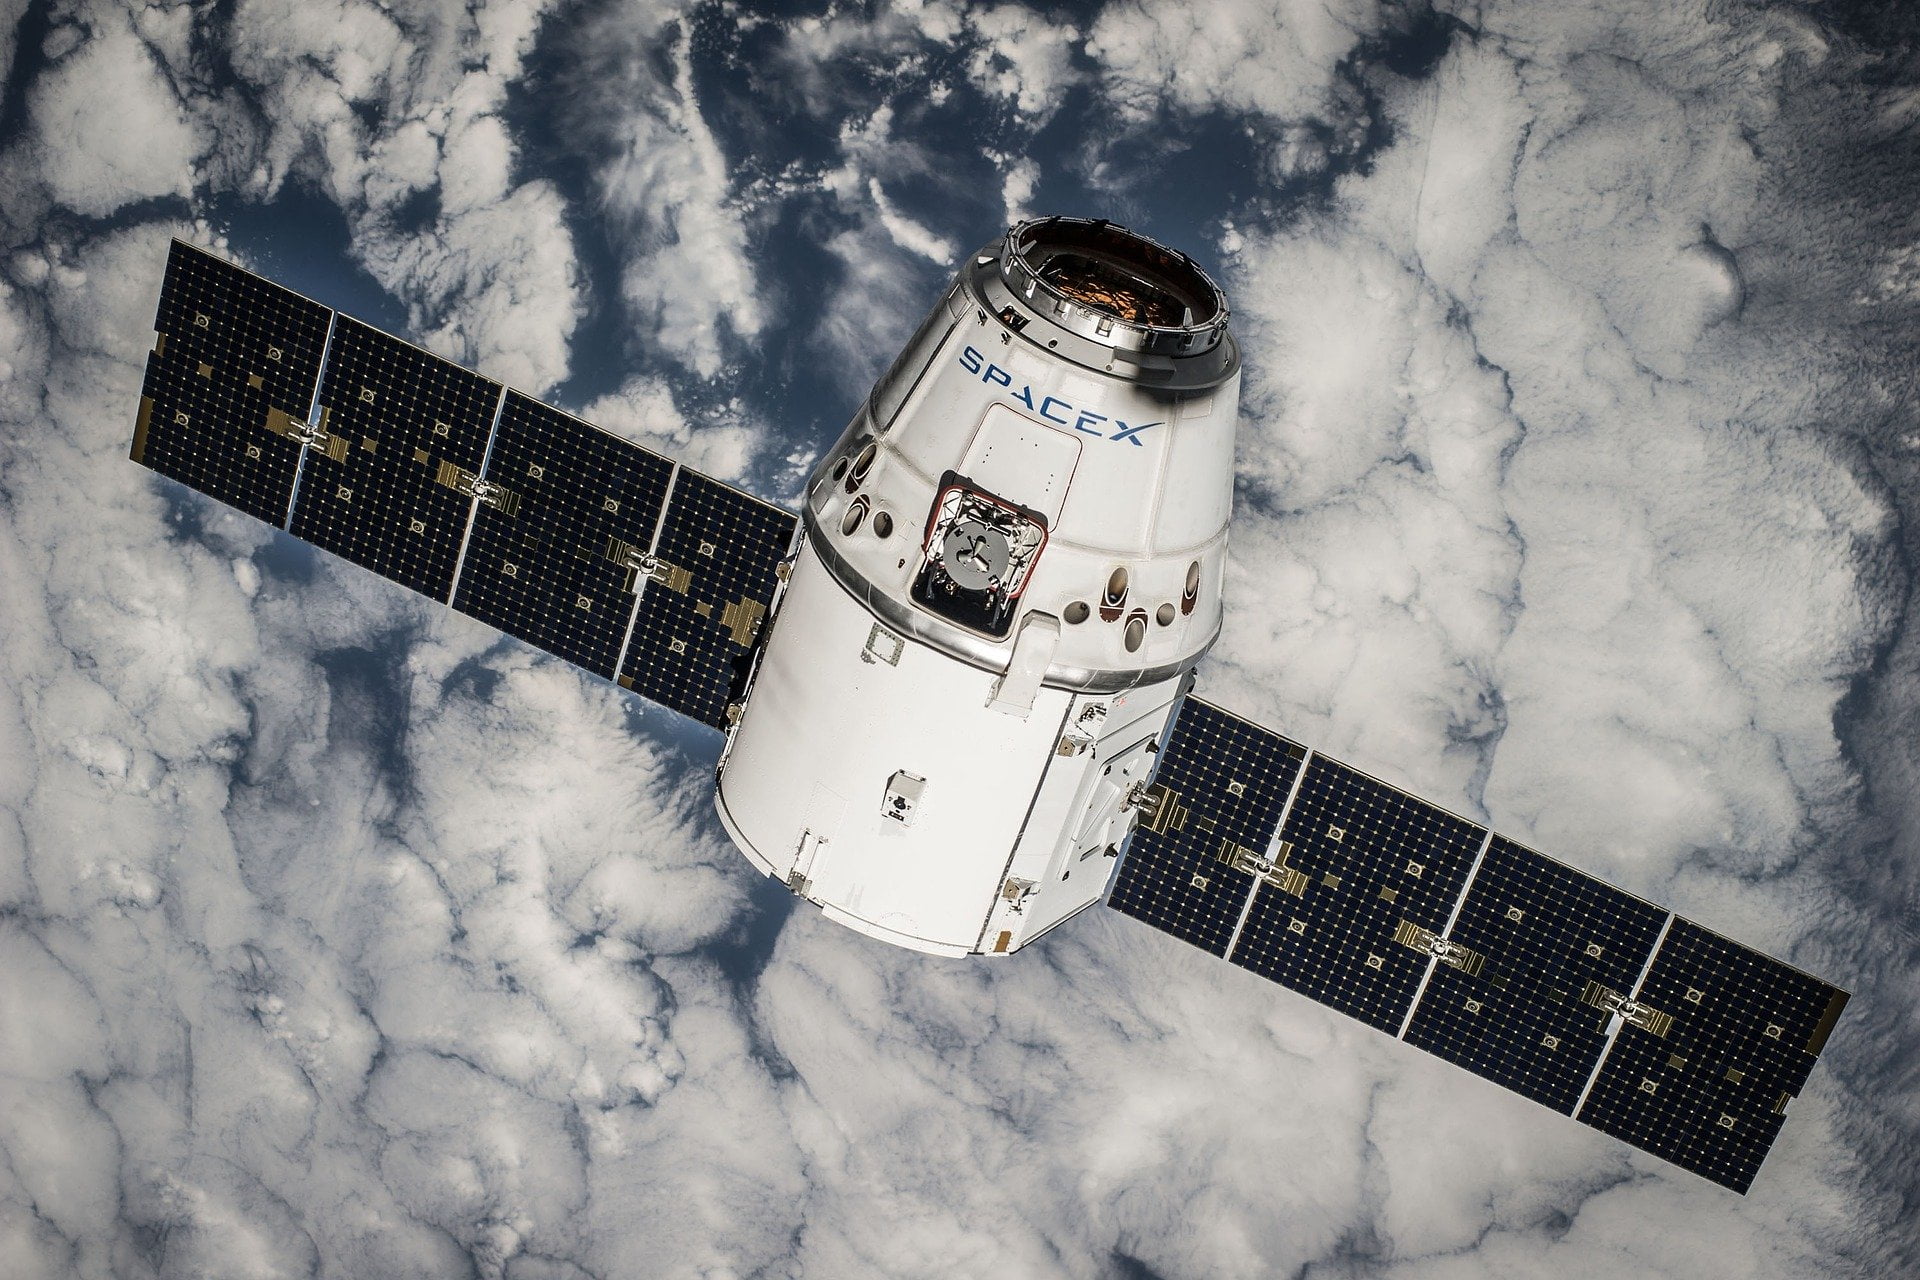 Selling Space – The Story Of SpaceX